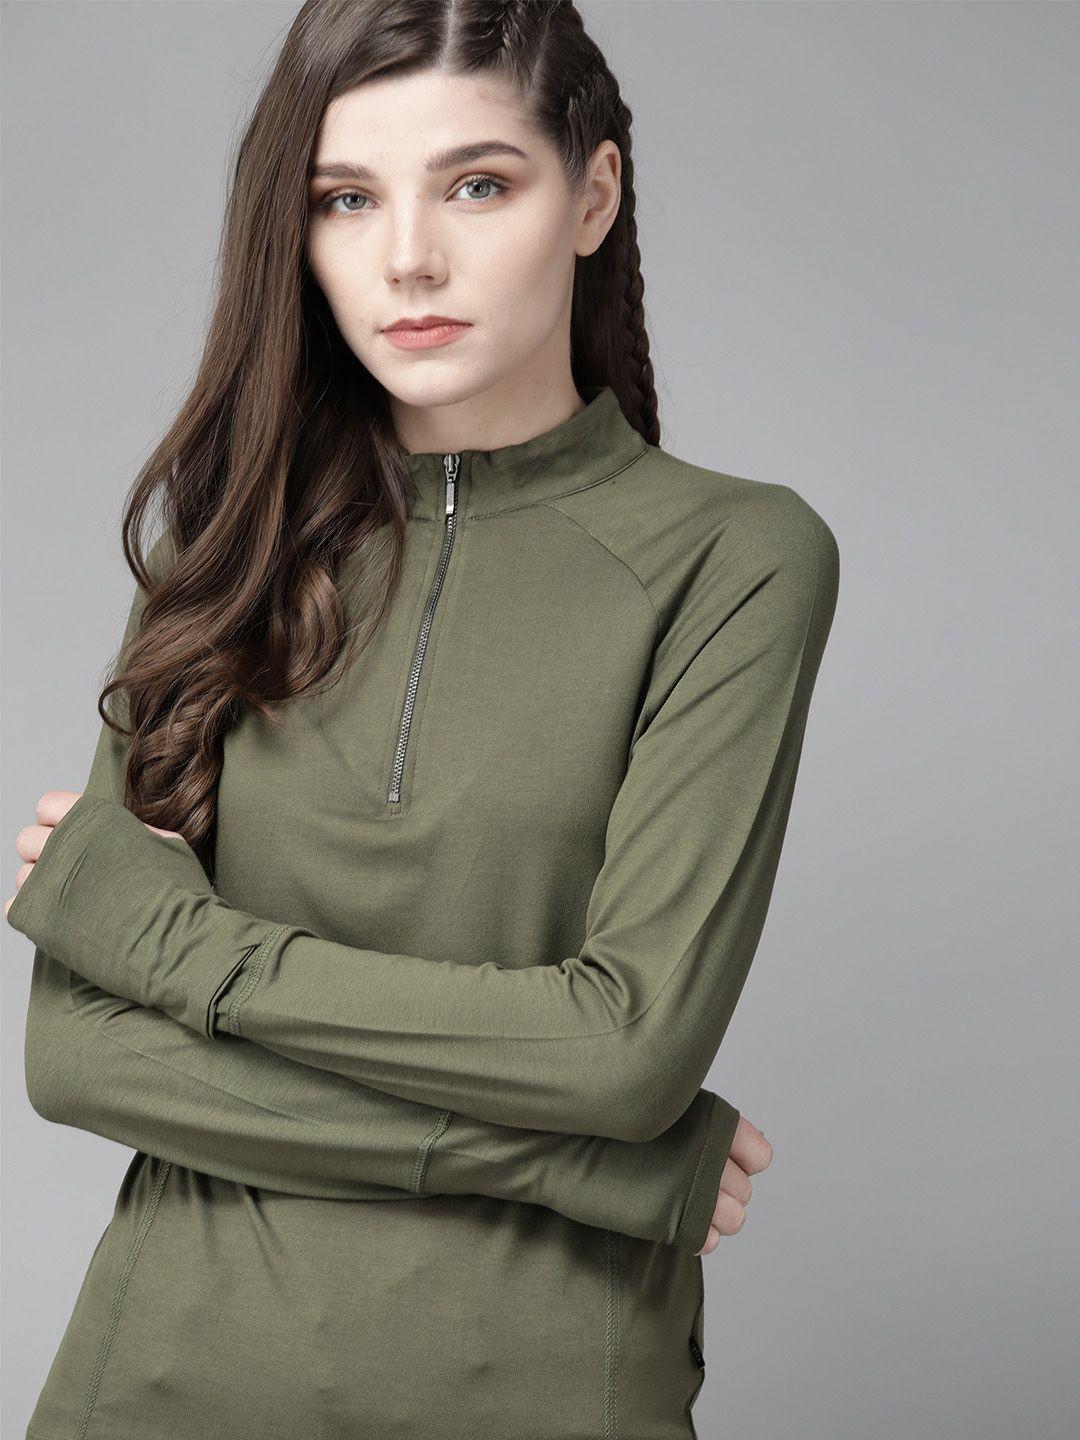 the roadster lifestyle co women olive green solid anti-bacterial mock neck t-shirt